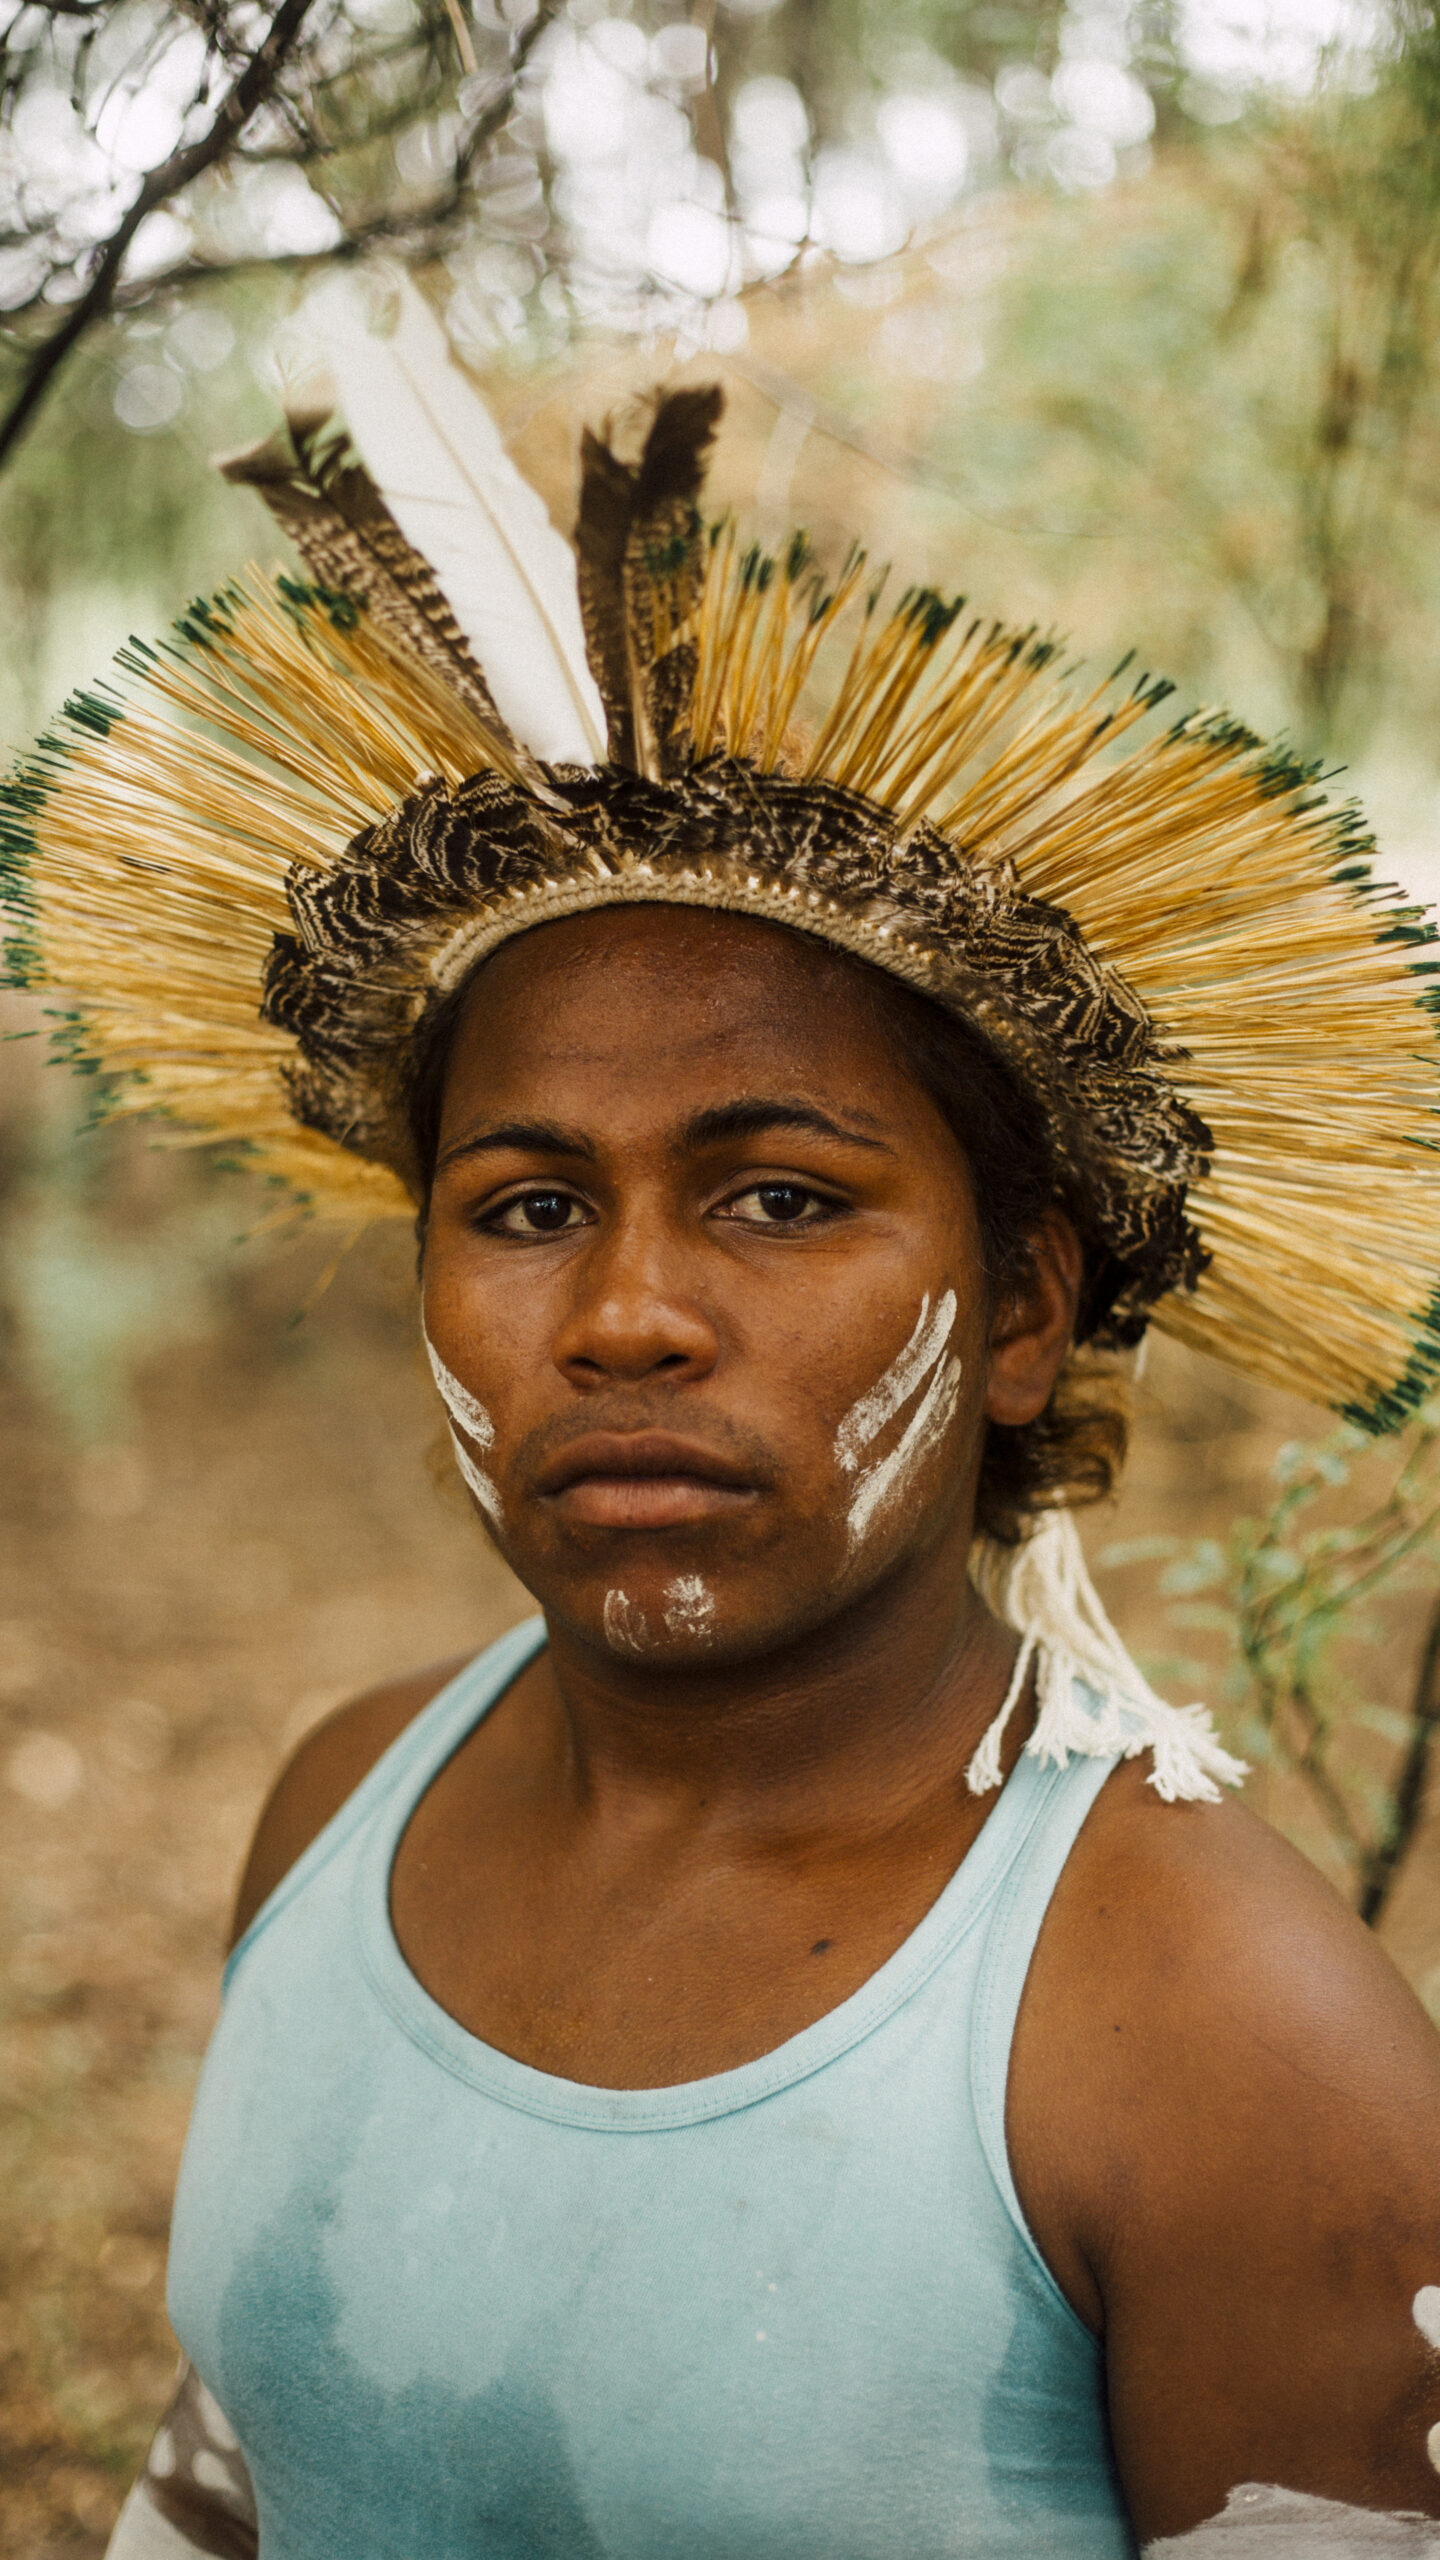 Portrait from the 'Origem' series, featuring illustrative background added through AR technology. A person wearing a blue vest with a headdress made of natural materials. They have two white stripes of paint across each cheek and on the chin. The background is blurred and shows a natural landscape with a tree closely behind in the top left corner.